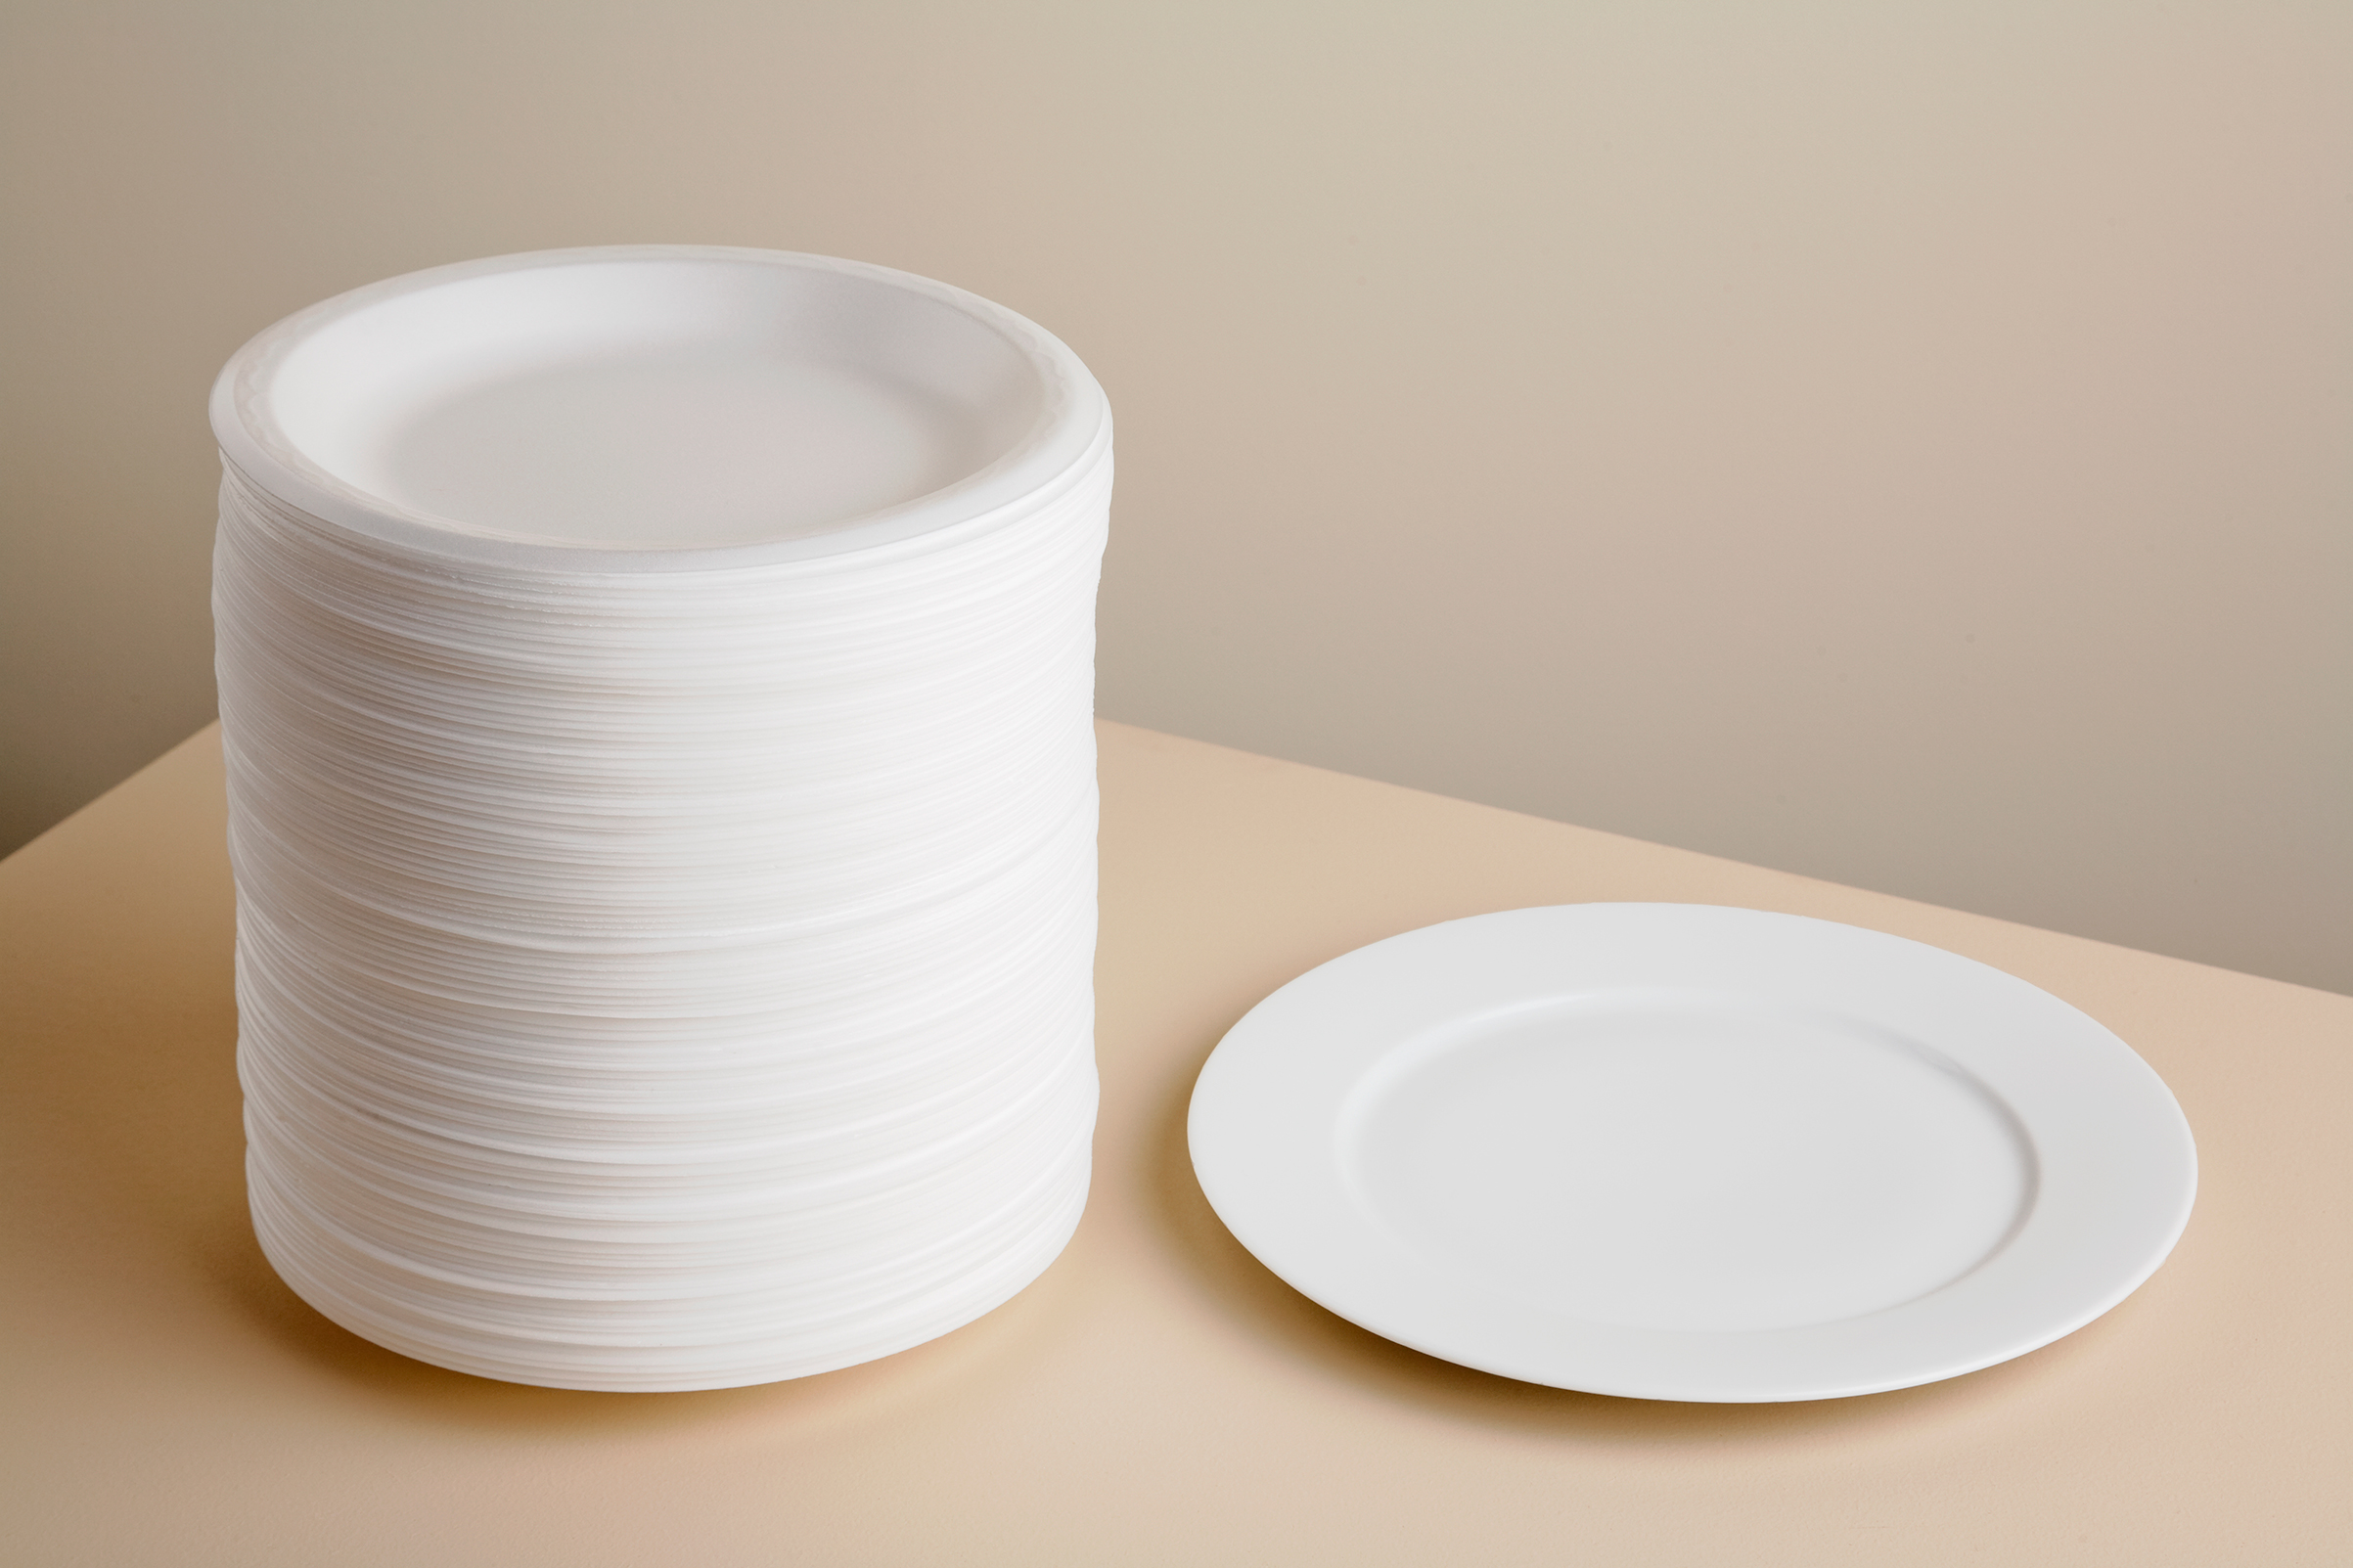 Stack of styrofoam plates and ceramic plate on table